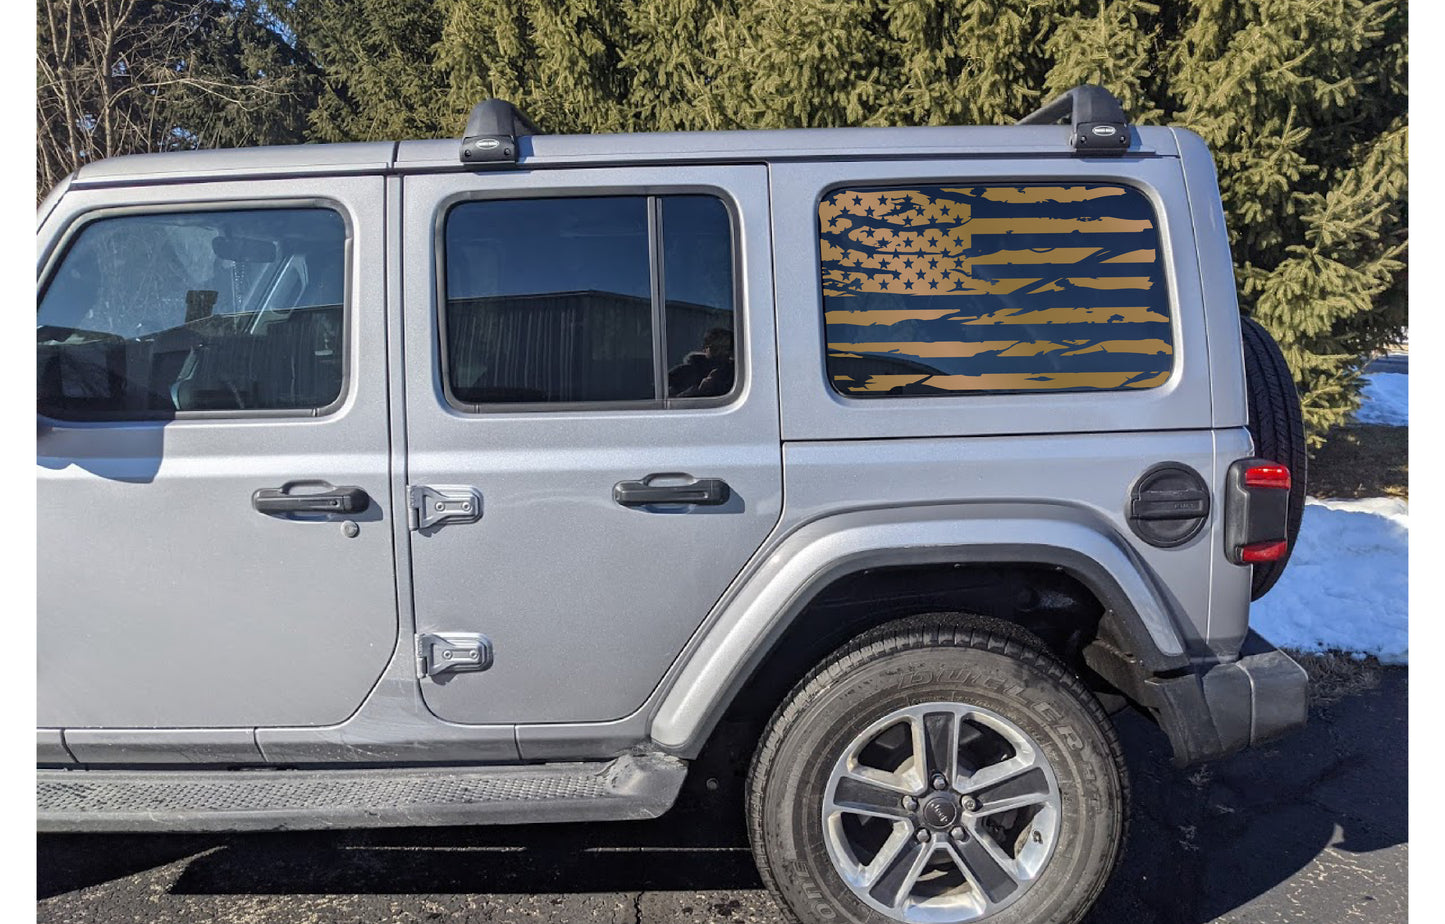 Distressed USA American Flag Rear Window Decal- Fits Jeep Wrangler JL